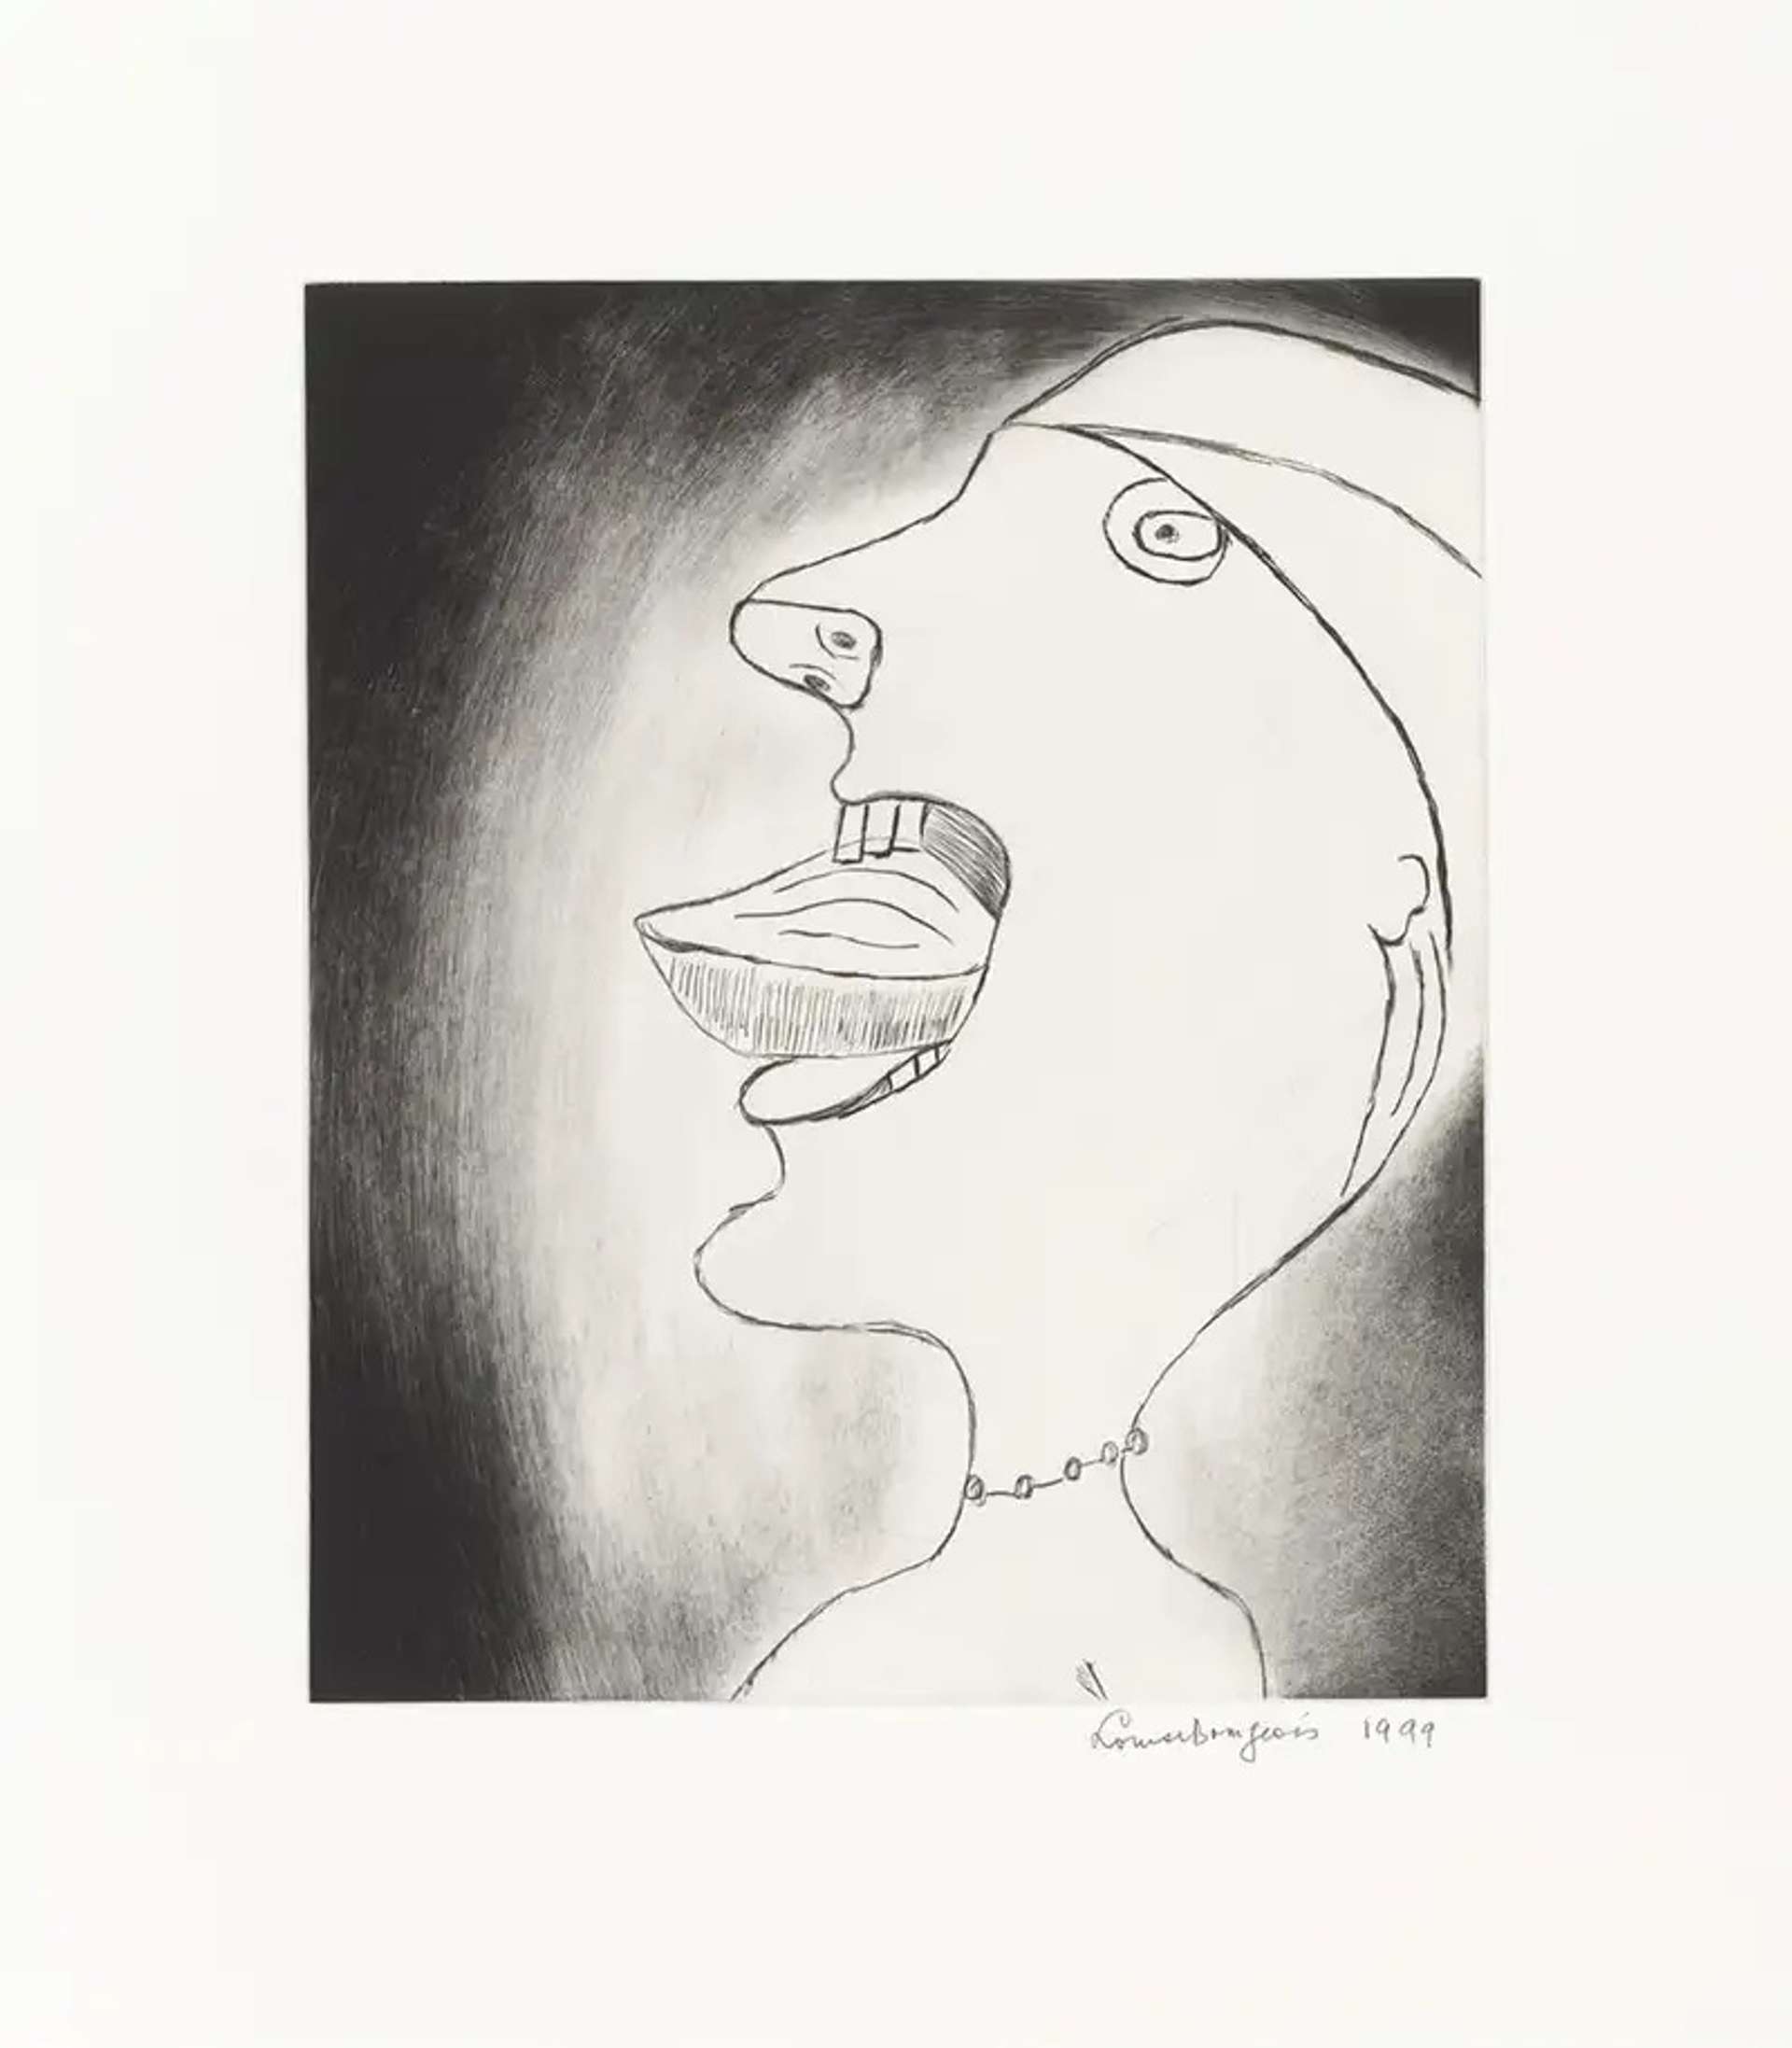 Louise Bourgeois’ Madeleine. A drypoint print of someone holding their head backwards with their tongue sticking out in front of them. 